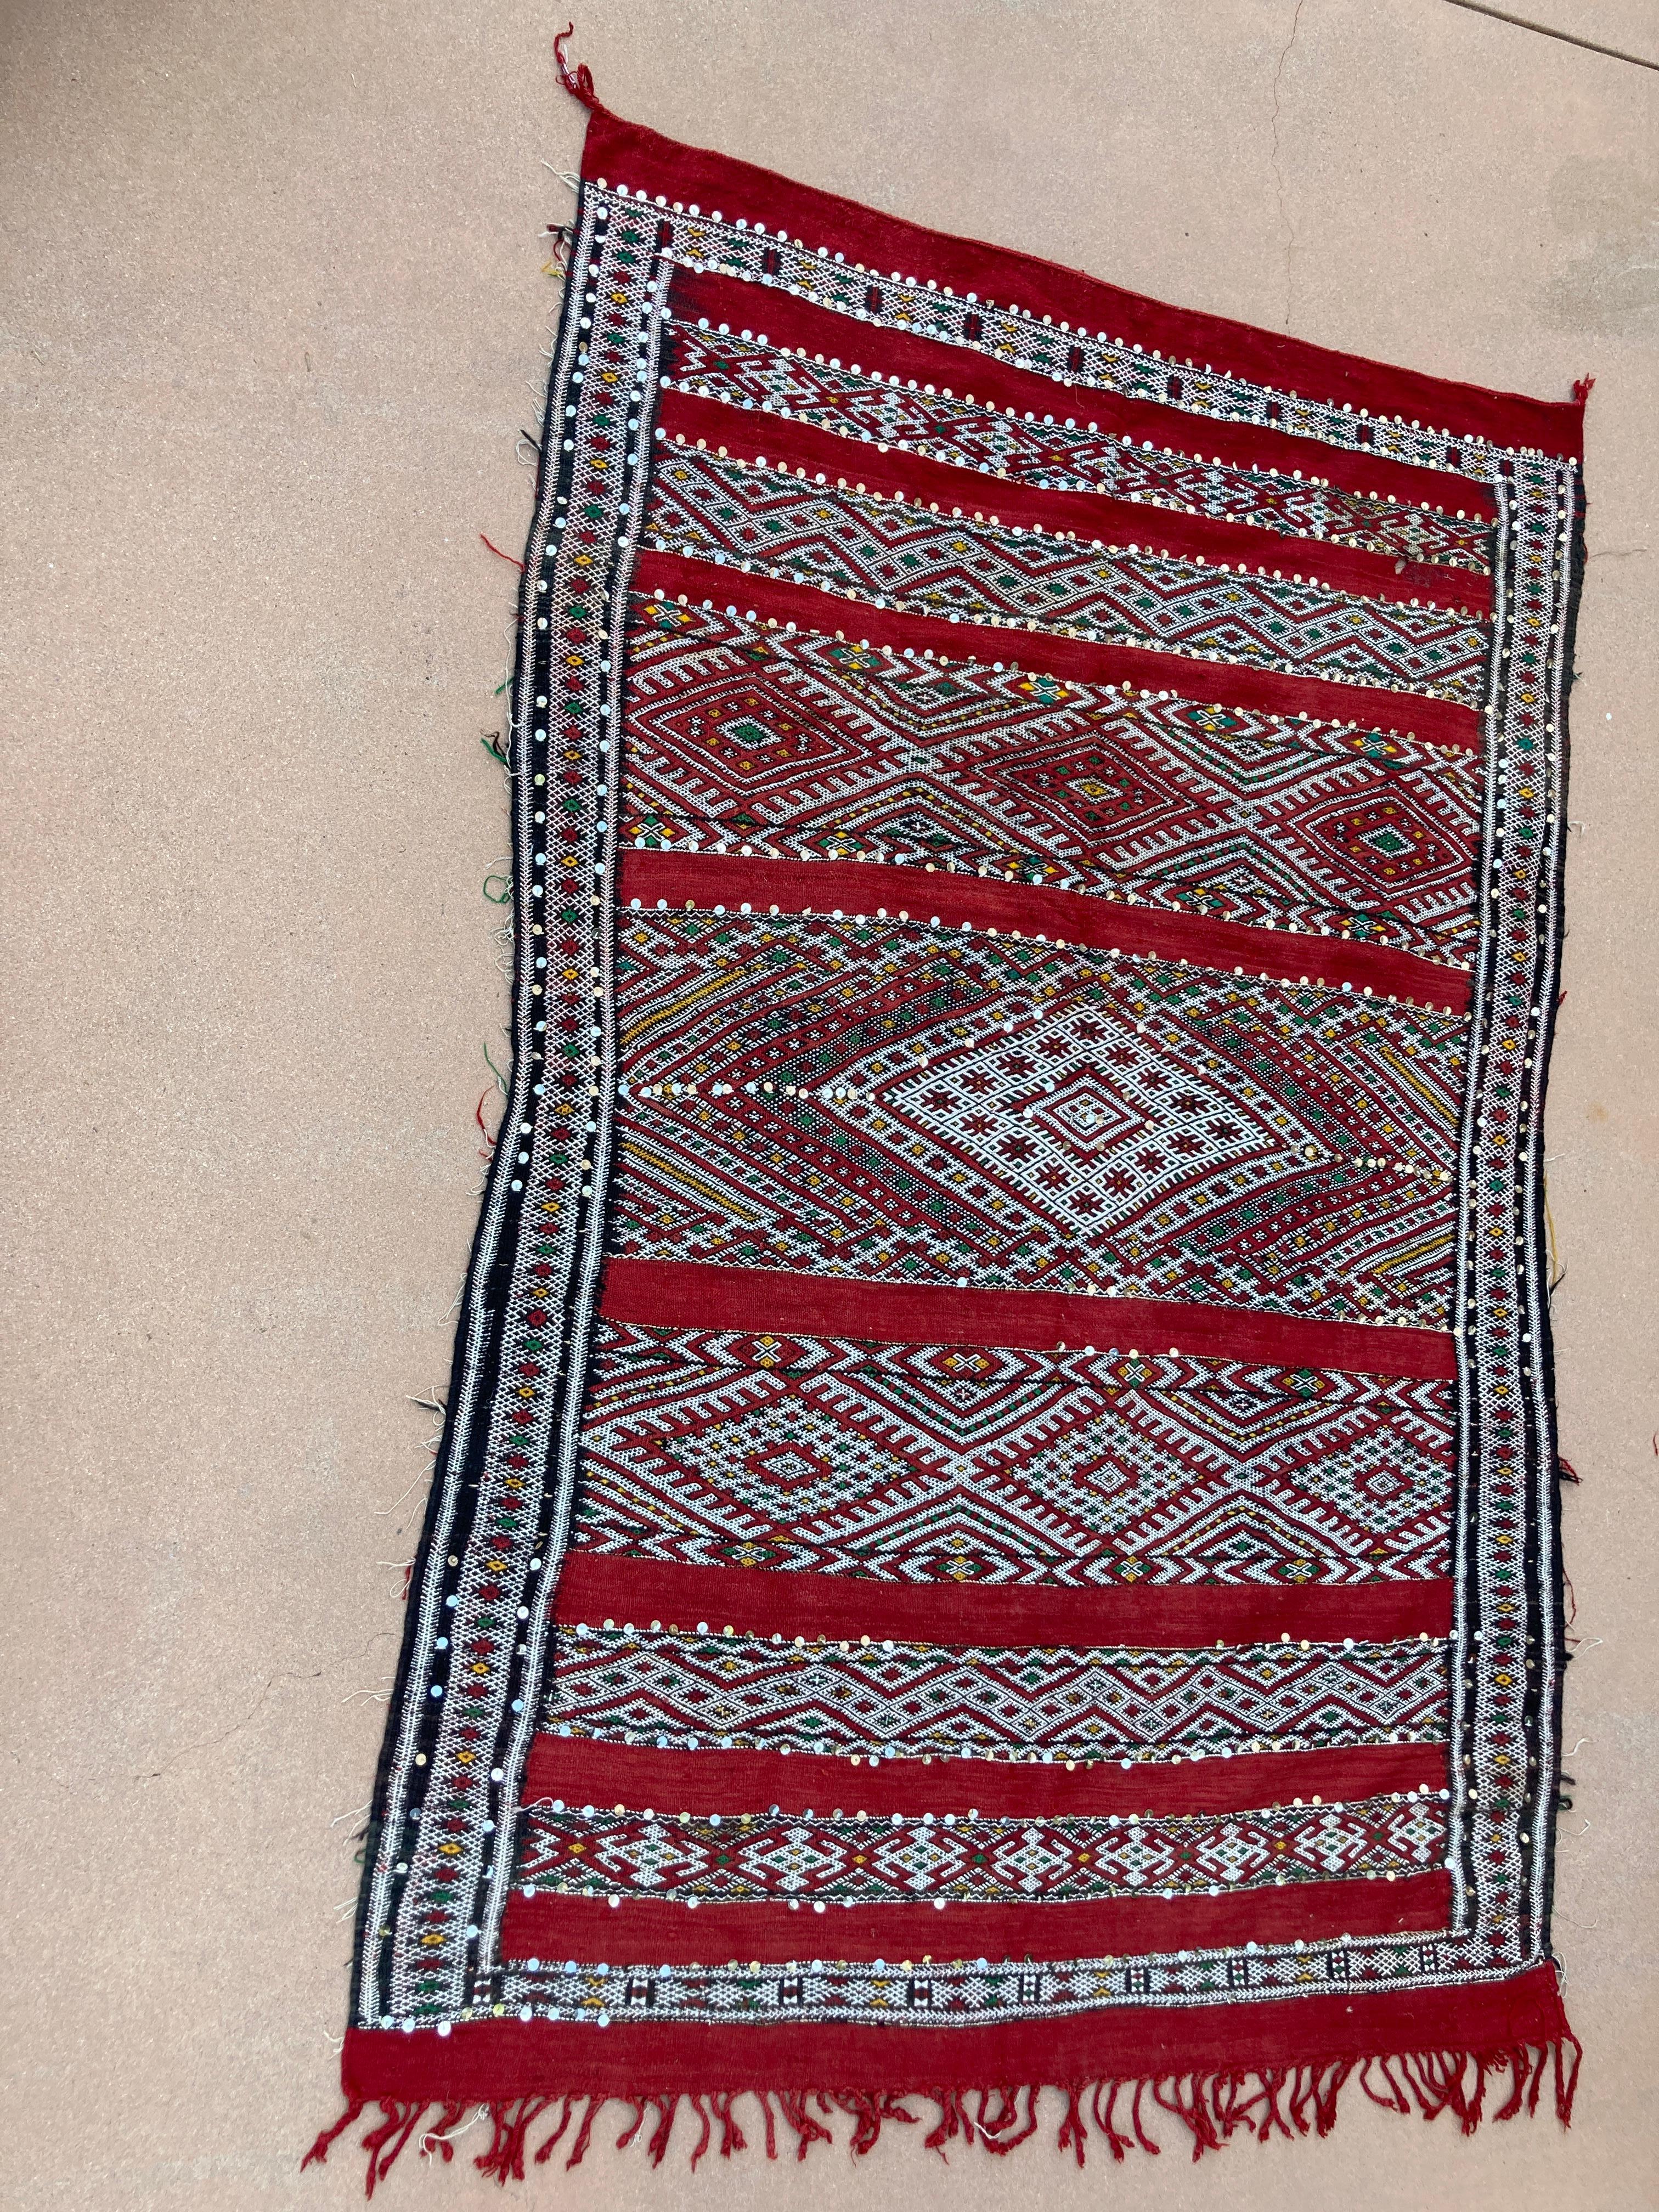 1960s Authentic Moroccan Ethnic Rug with Sequins North Africa, Handira In Good Condition For Sale In North Hollywood, CA